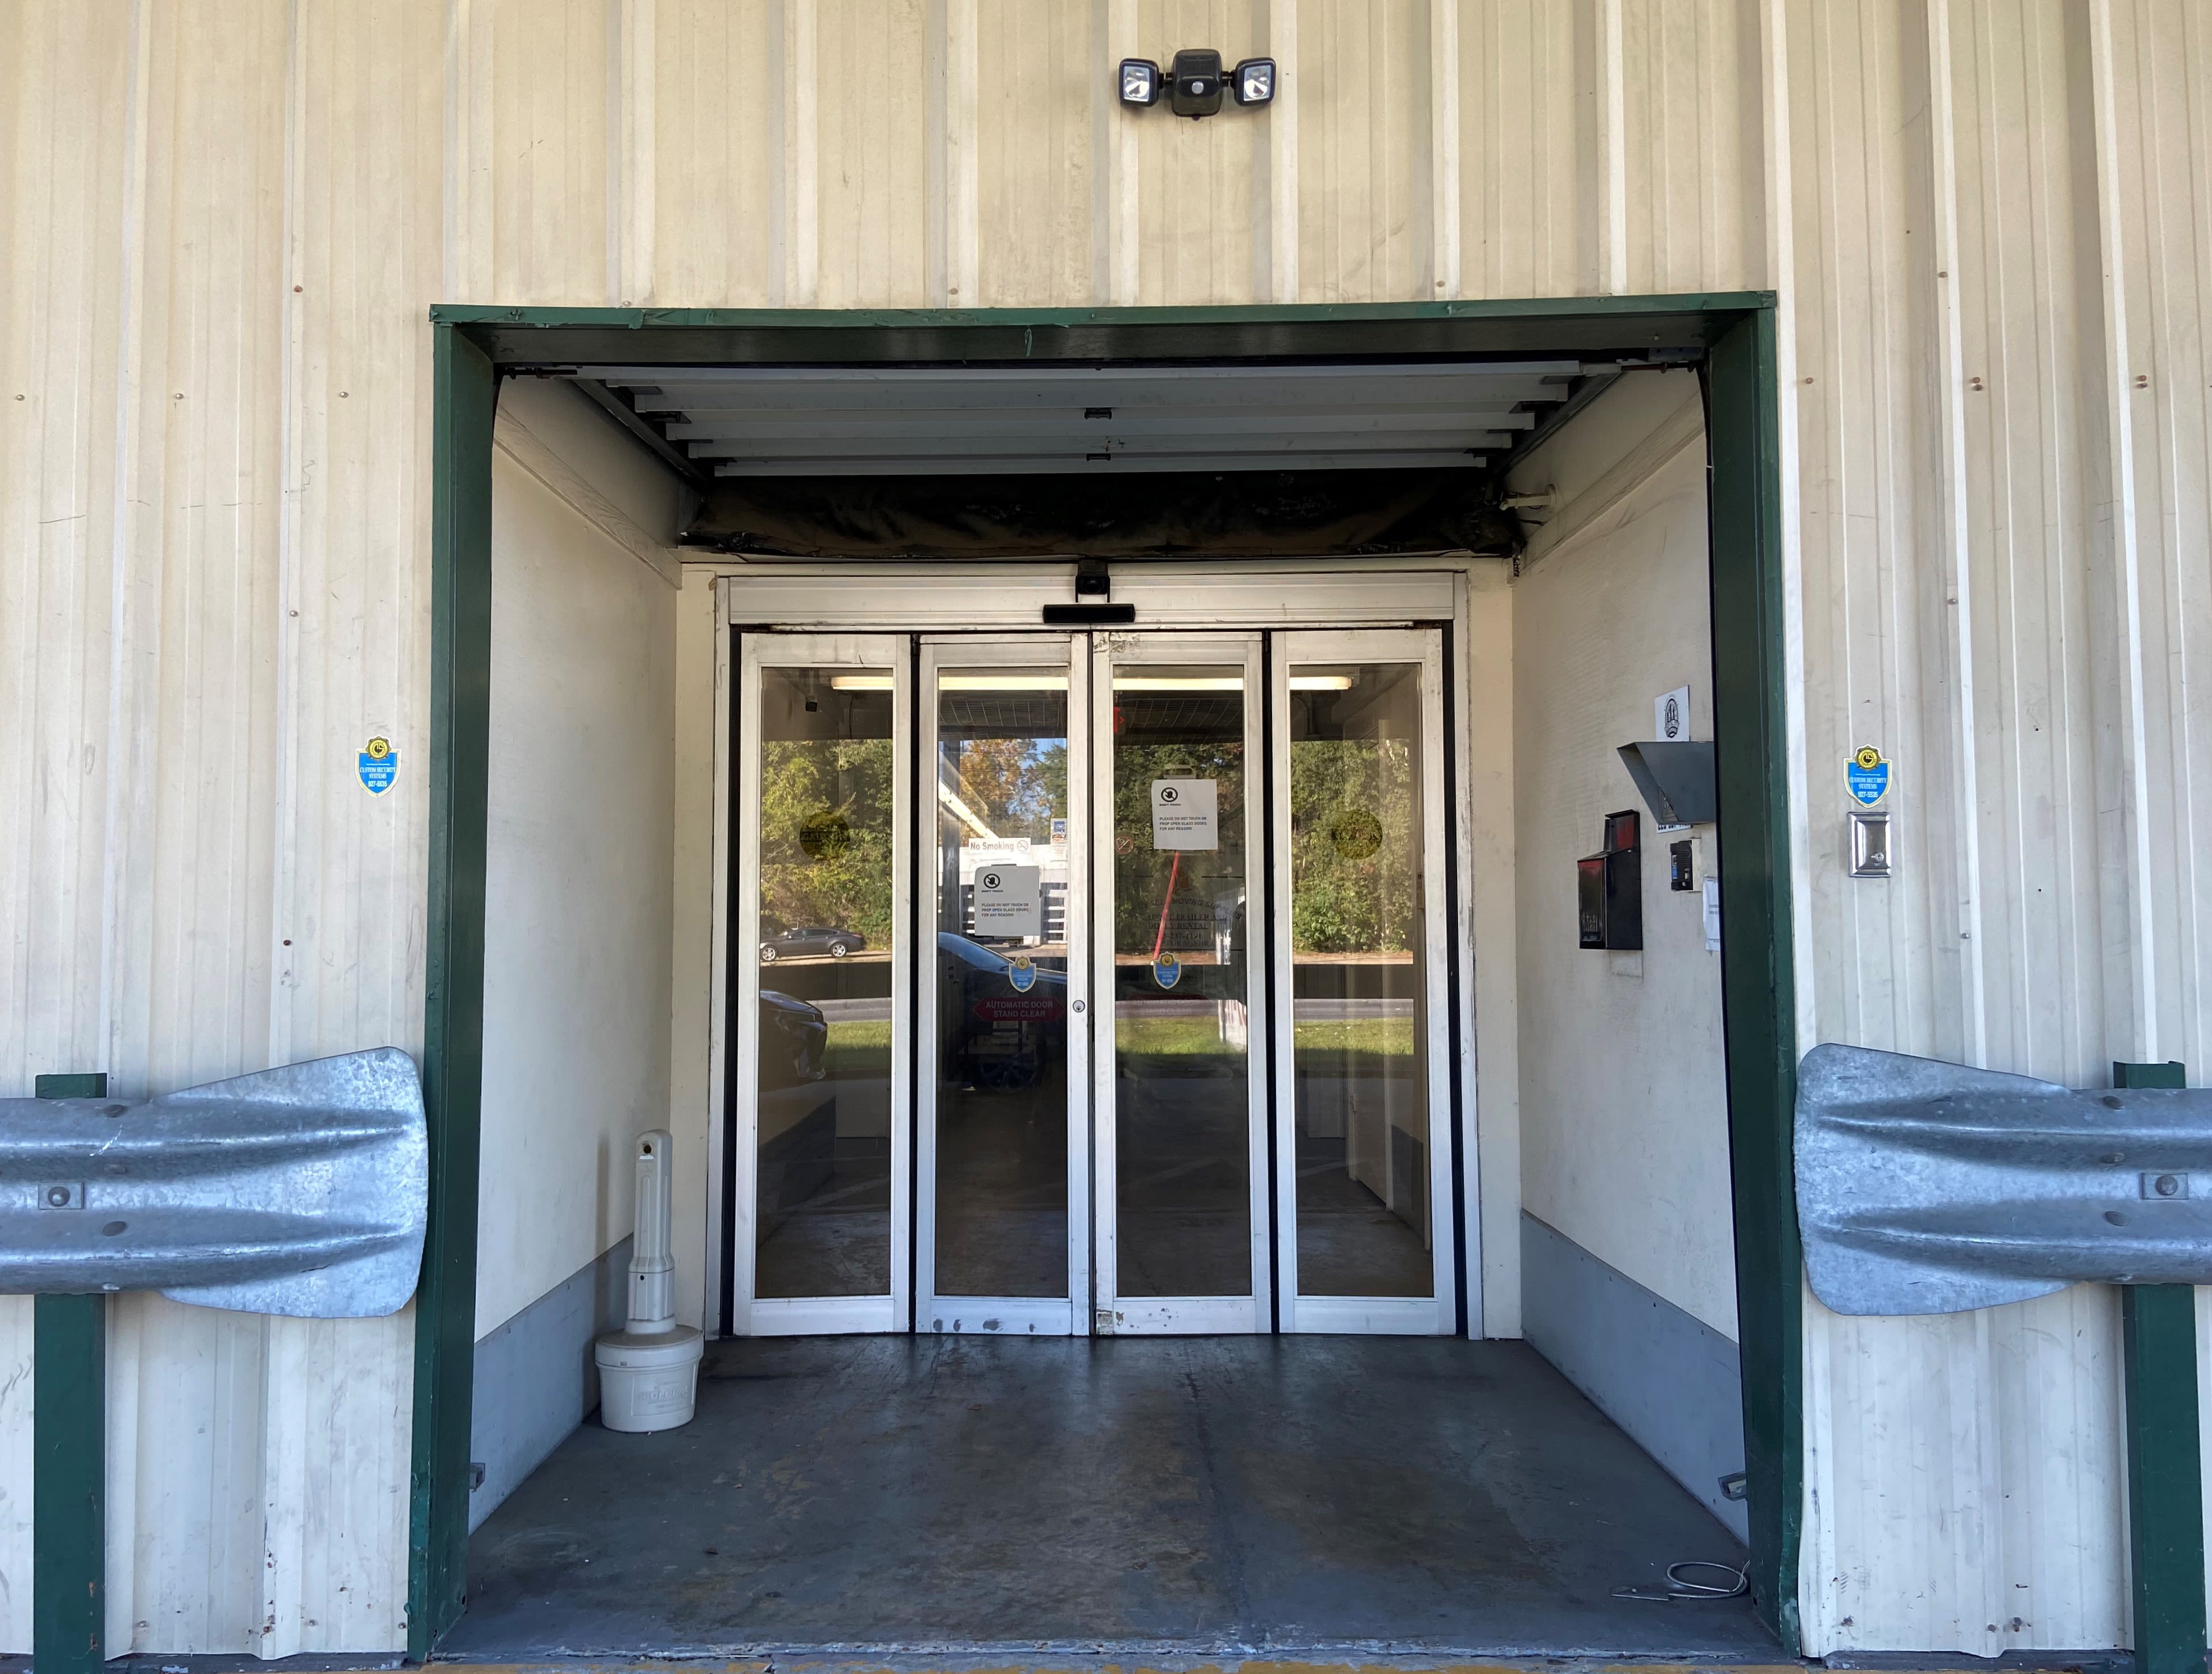 View our hours and directions at KO Storage of Baton Rouge in Baton Rouge, Louisiana